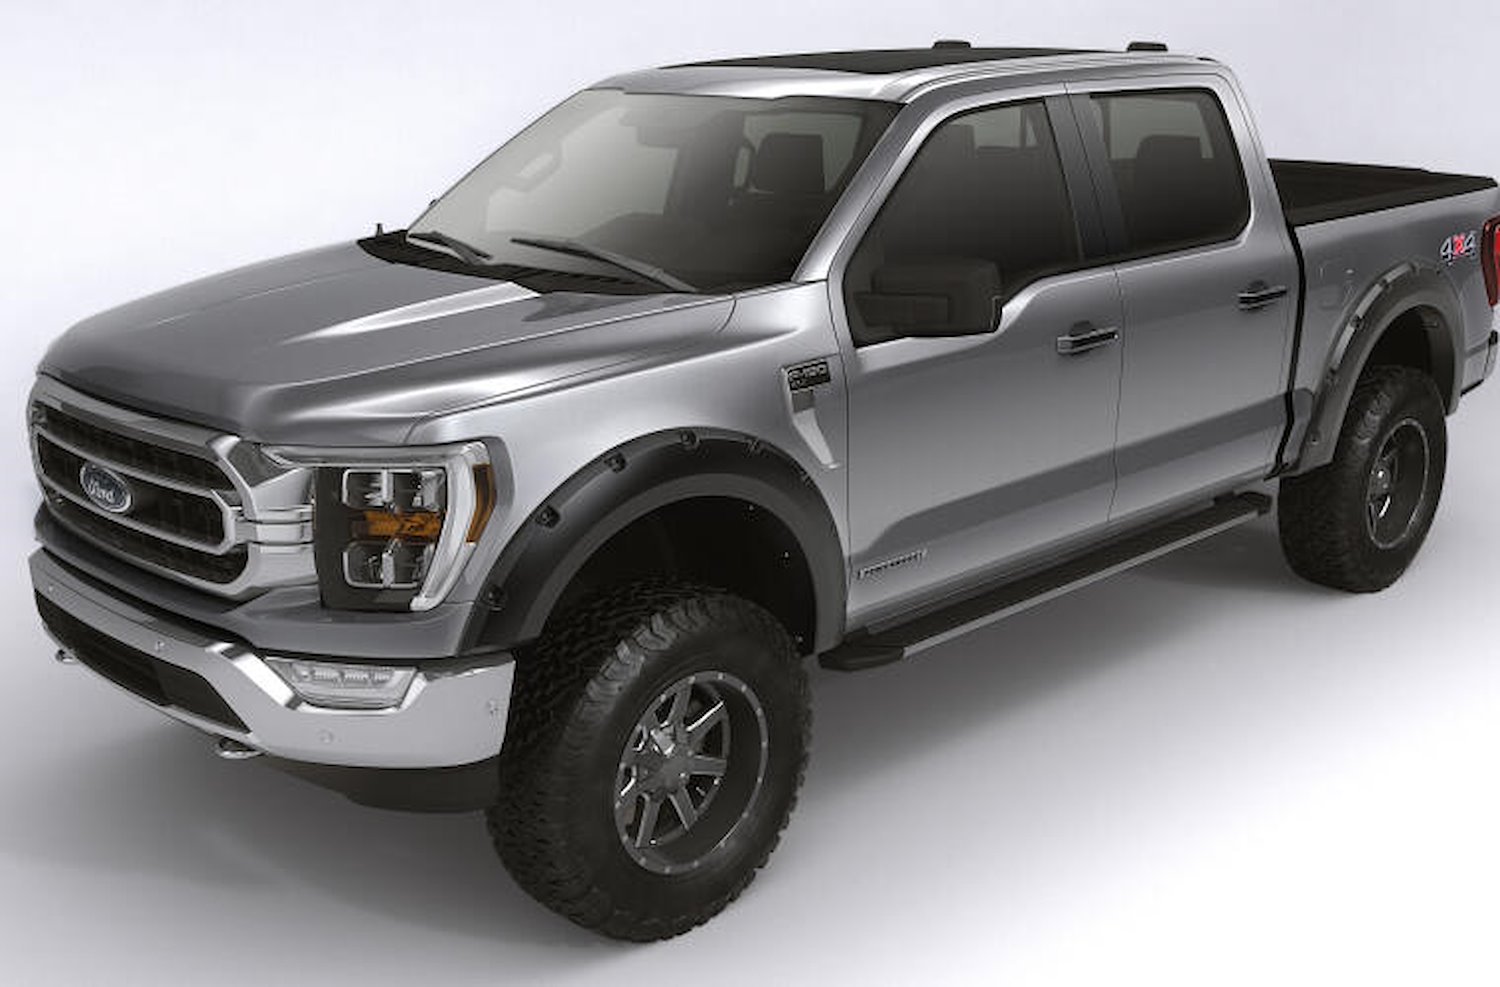 Forge Front/Rear Fender Flares for 2015-2017 Ford F-150